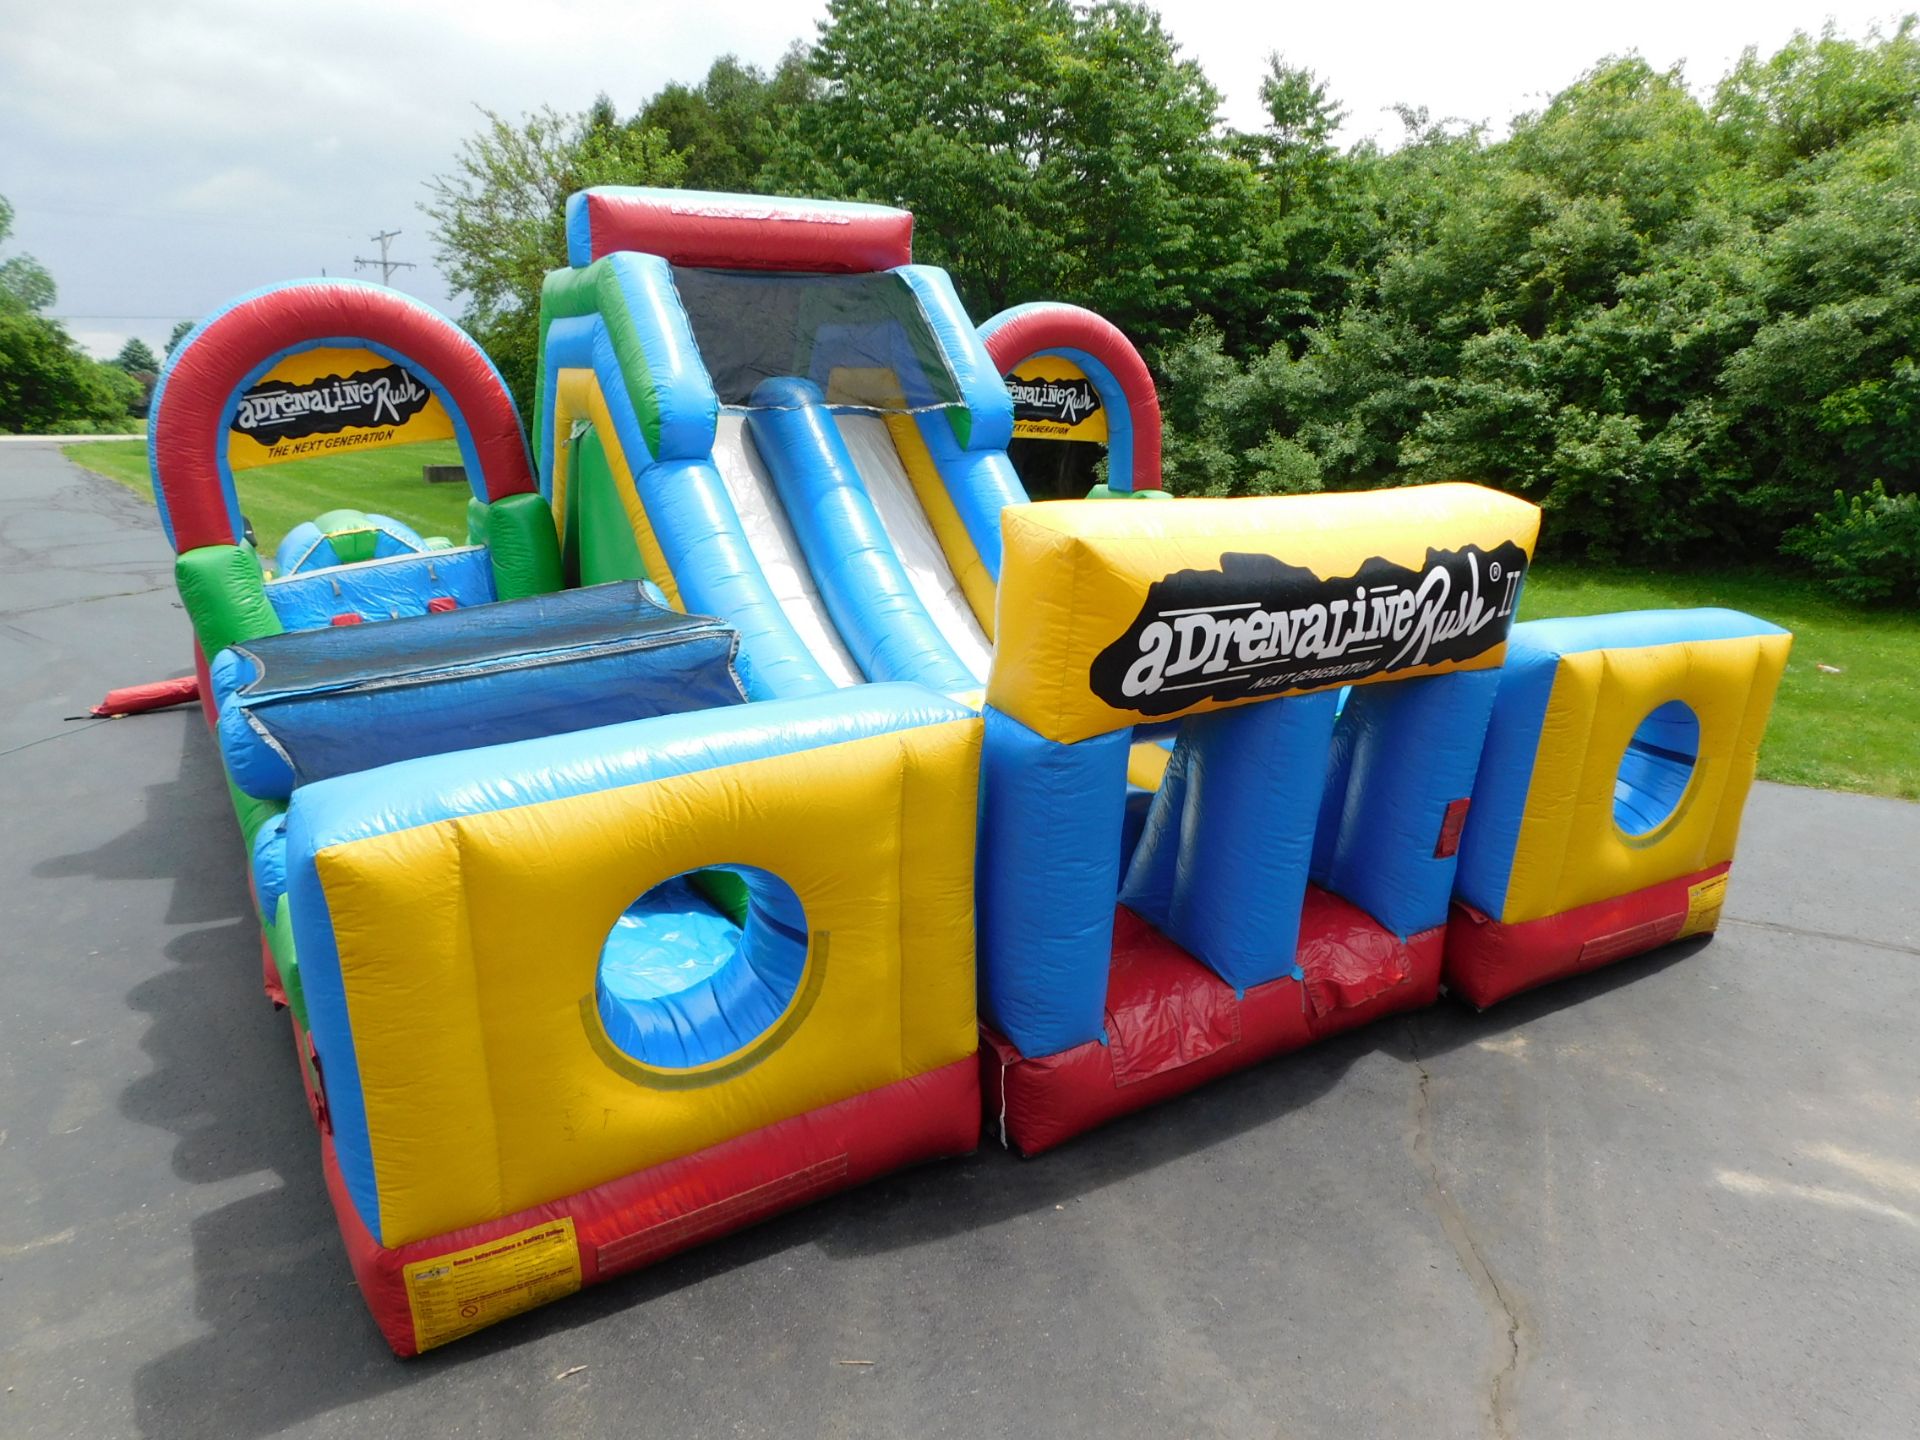 Inflatable Store "Adrenaline Rush" The Next Generation 3 piece Inflatable Obstacle Course, 24'WX34'